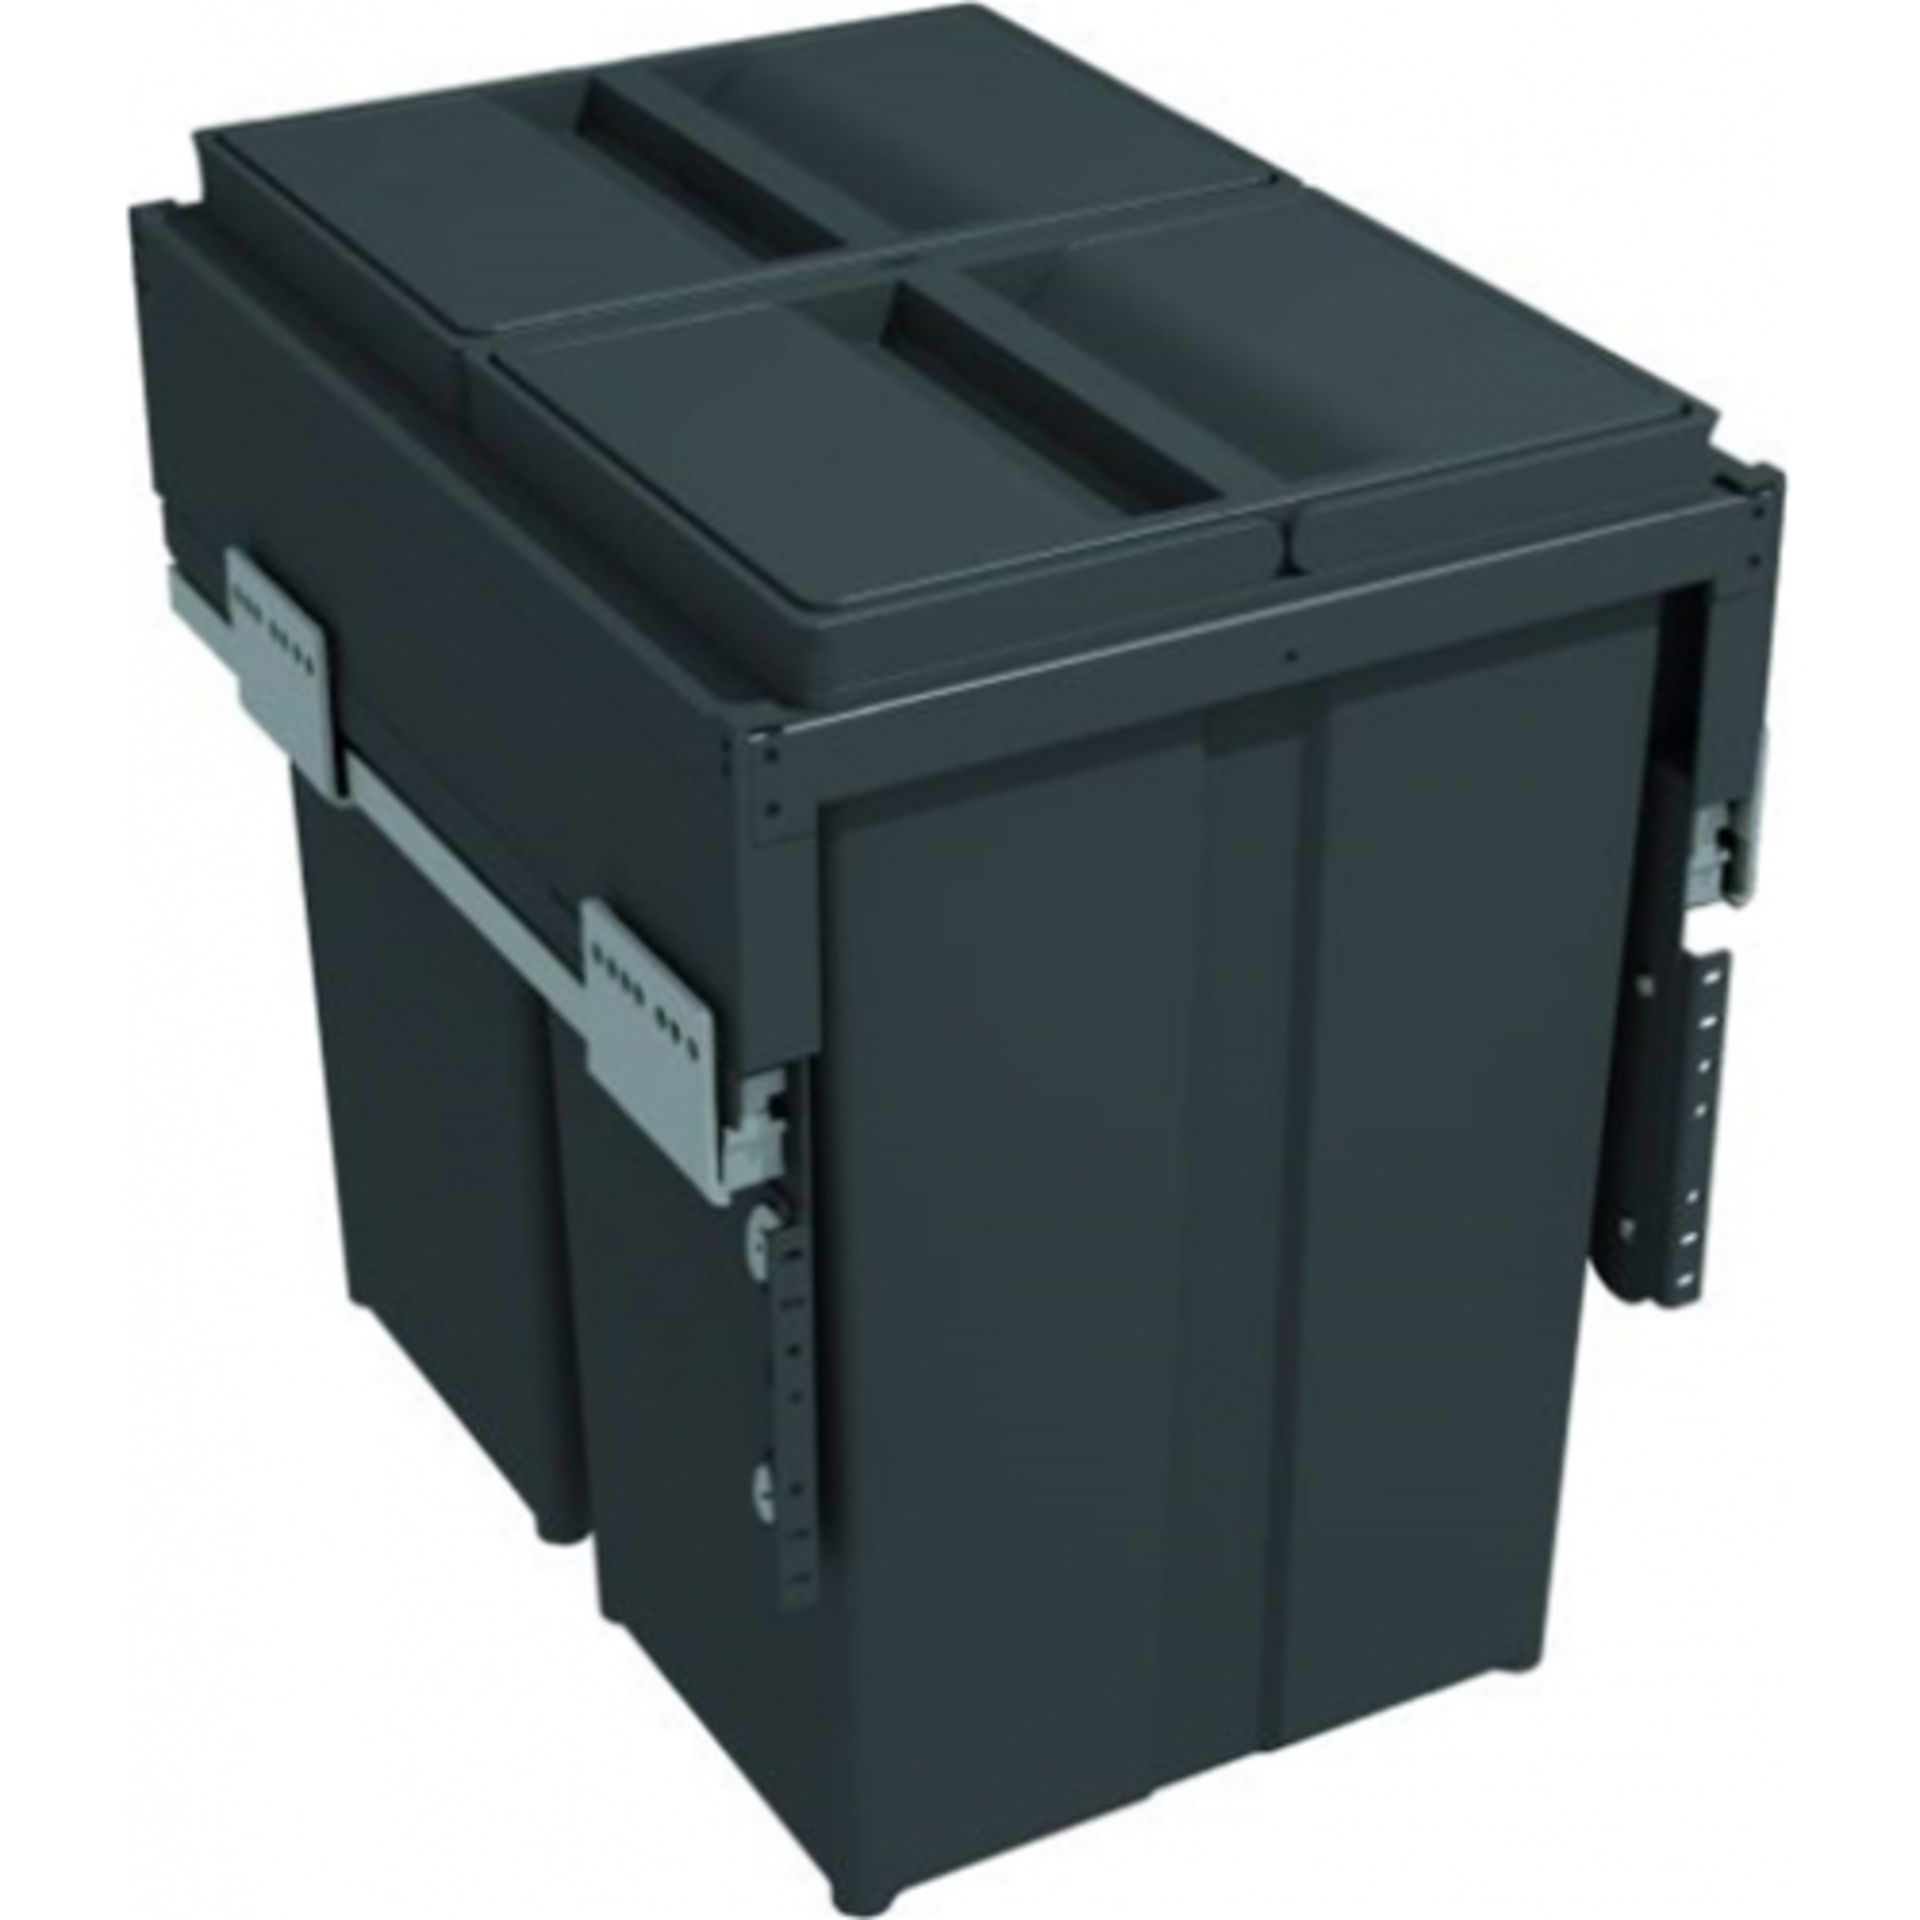 Brand New Boxed Fitted Bins - Pull-Out Waste Bin With Plastic Lid, 2 x 29 Litre Bins RRP £303